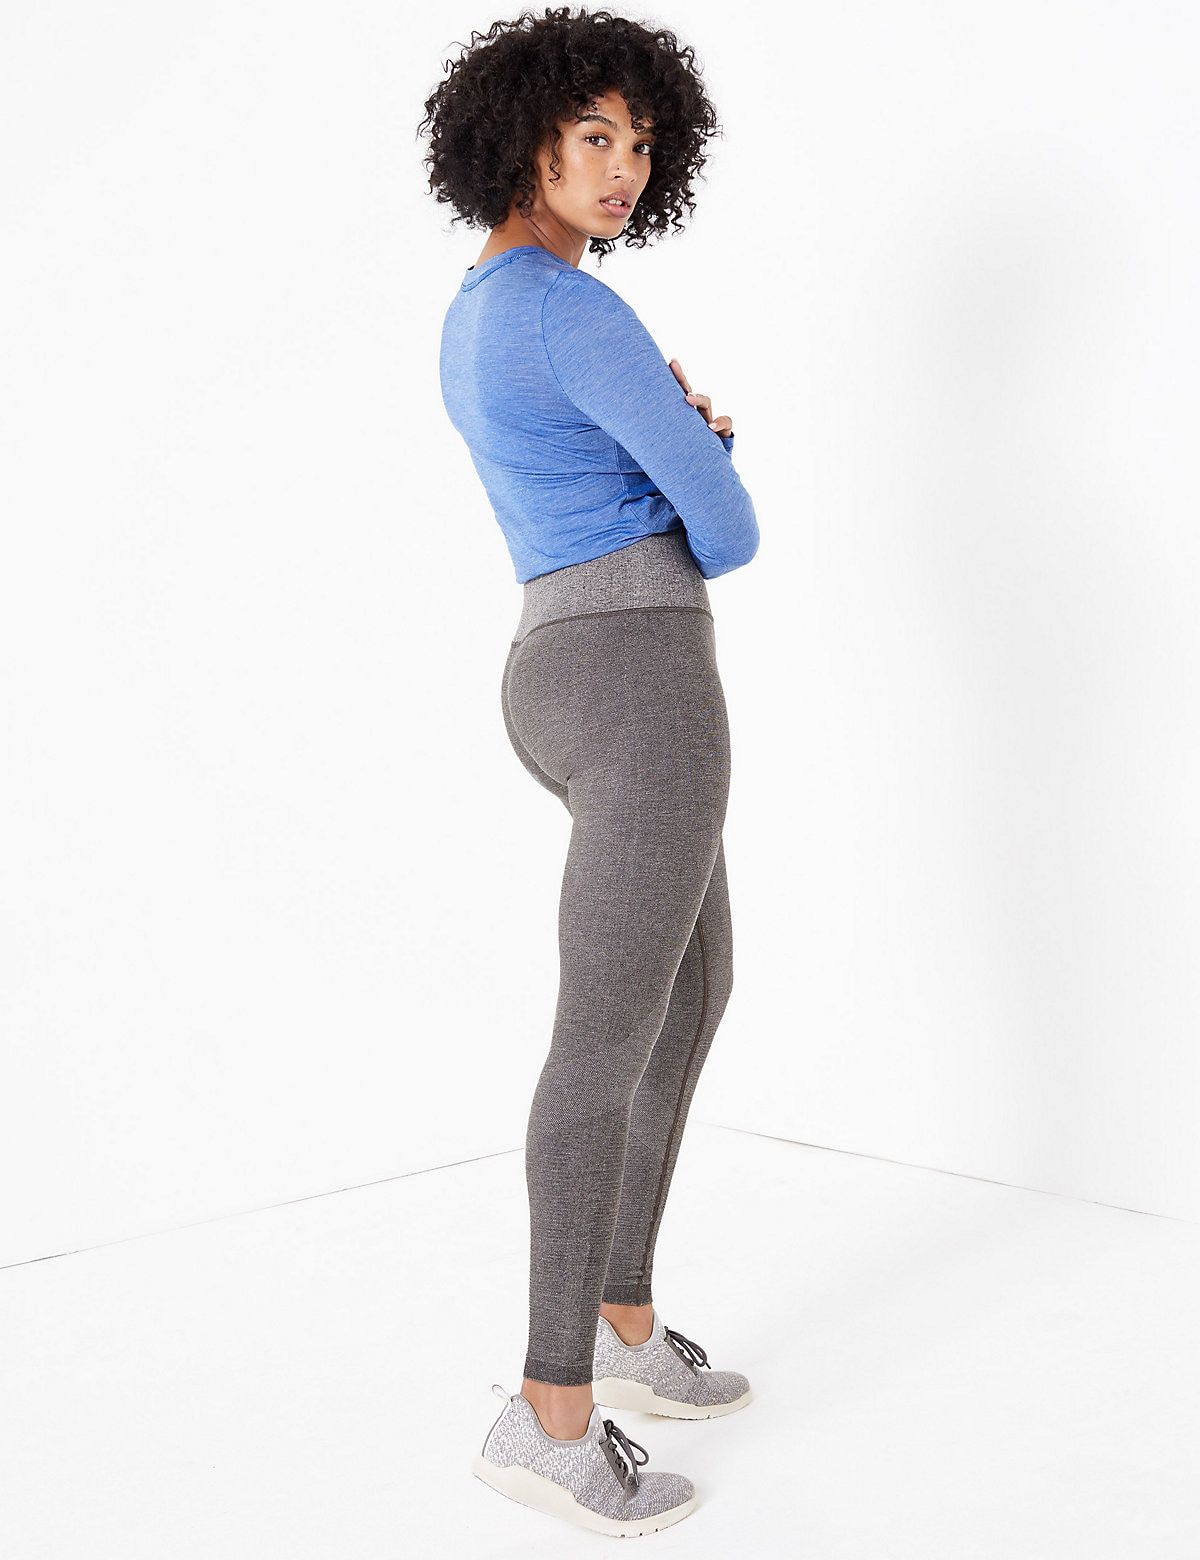 marks and spencer yoga pants